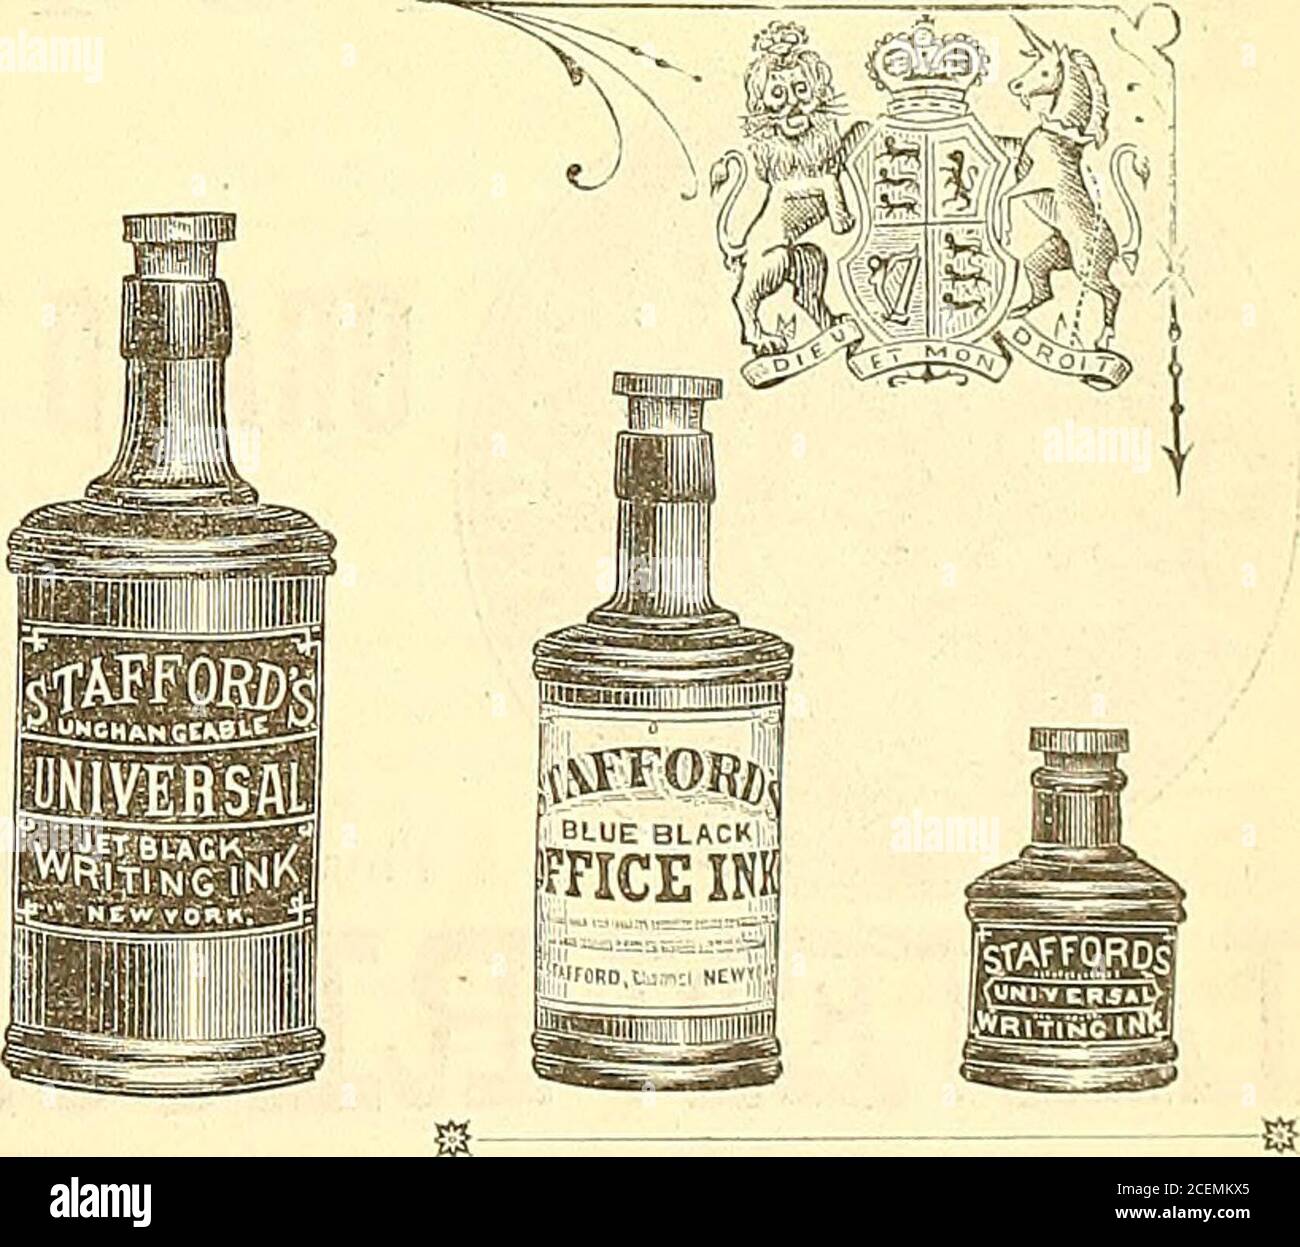 . The American stationer. s AMERICAN DEPOT : No. ai8 Pearl Street, New York. O STAFFORDS a- ENGLISH DEPOT : 31, 23*85 Birchin tane. London, £. C, England. AMERICAN WHITING INKS Have obtained the Hlgliest Awards every time they have been exhibited. Tliey were awarded tlie Bronze Medal at the Toronto (Ontario) Exhibition of 1880, being the only award made for Writing Inks. Universal Writing Ink, the only jet black fluid in existence. Commercial Writing Ink, ultramarine blue at flrst, changing tojet black. Violet Black Copying Ink copies as well after three months as when flrst written. Blue-Blac Stock Photo